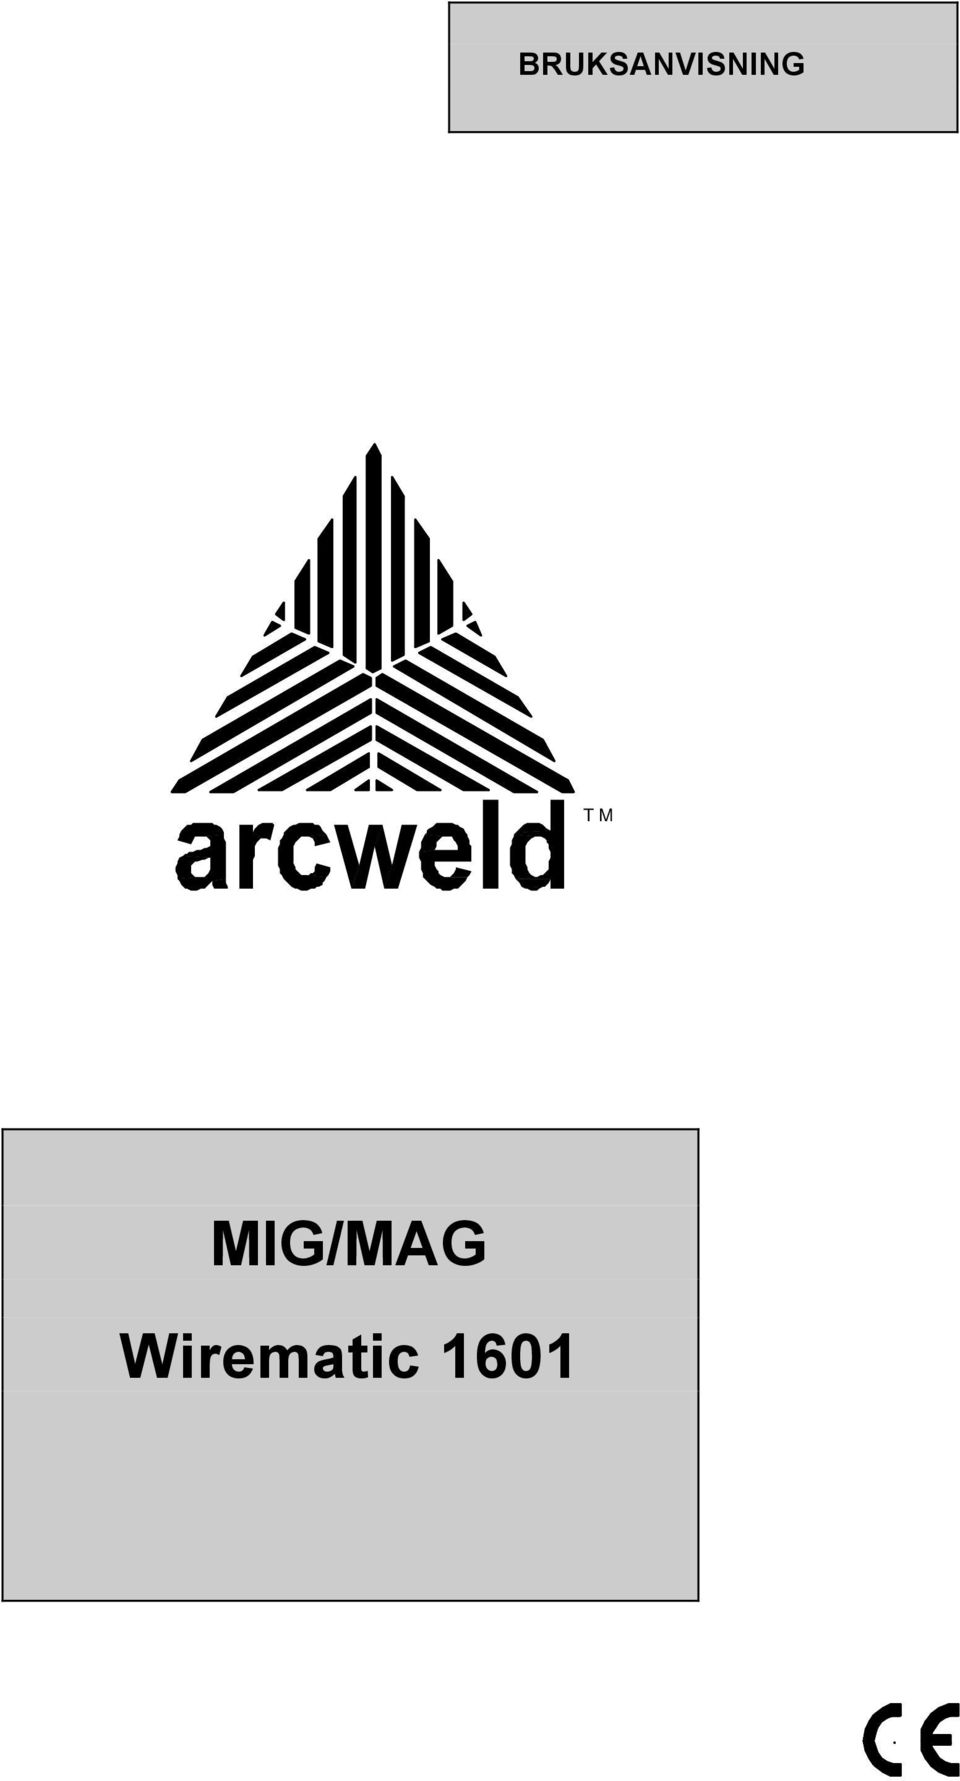 Wirematic